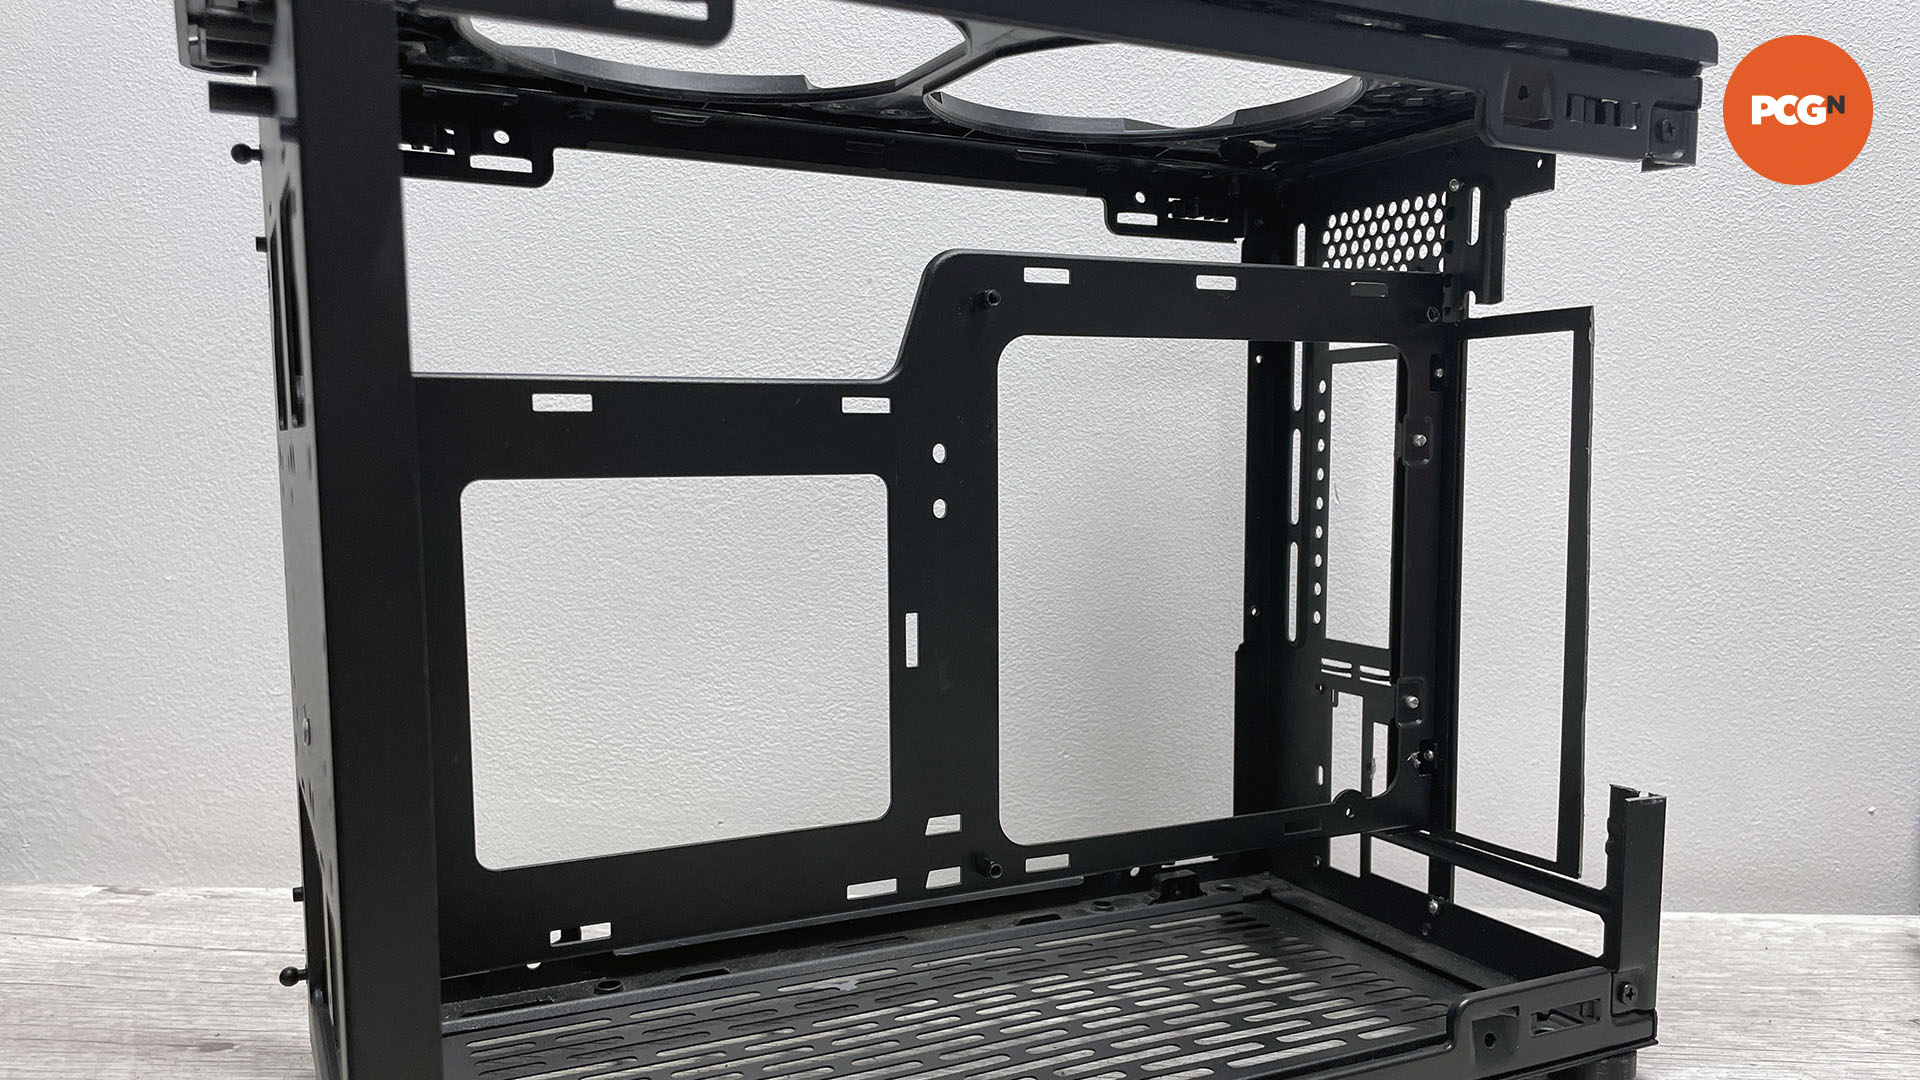 How to move the motherboard tray in your PC case: Rivet motherboard tray and IO opening